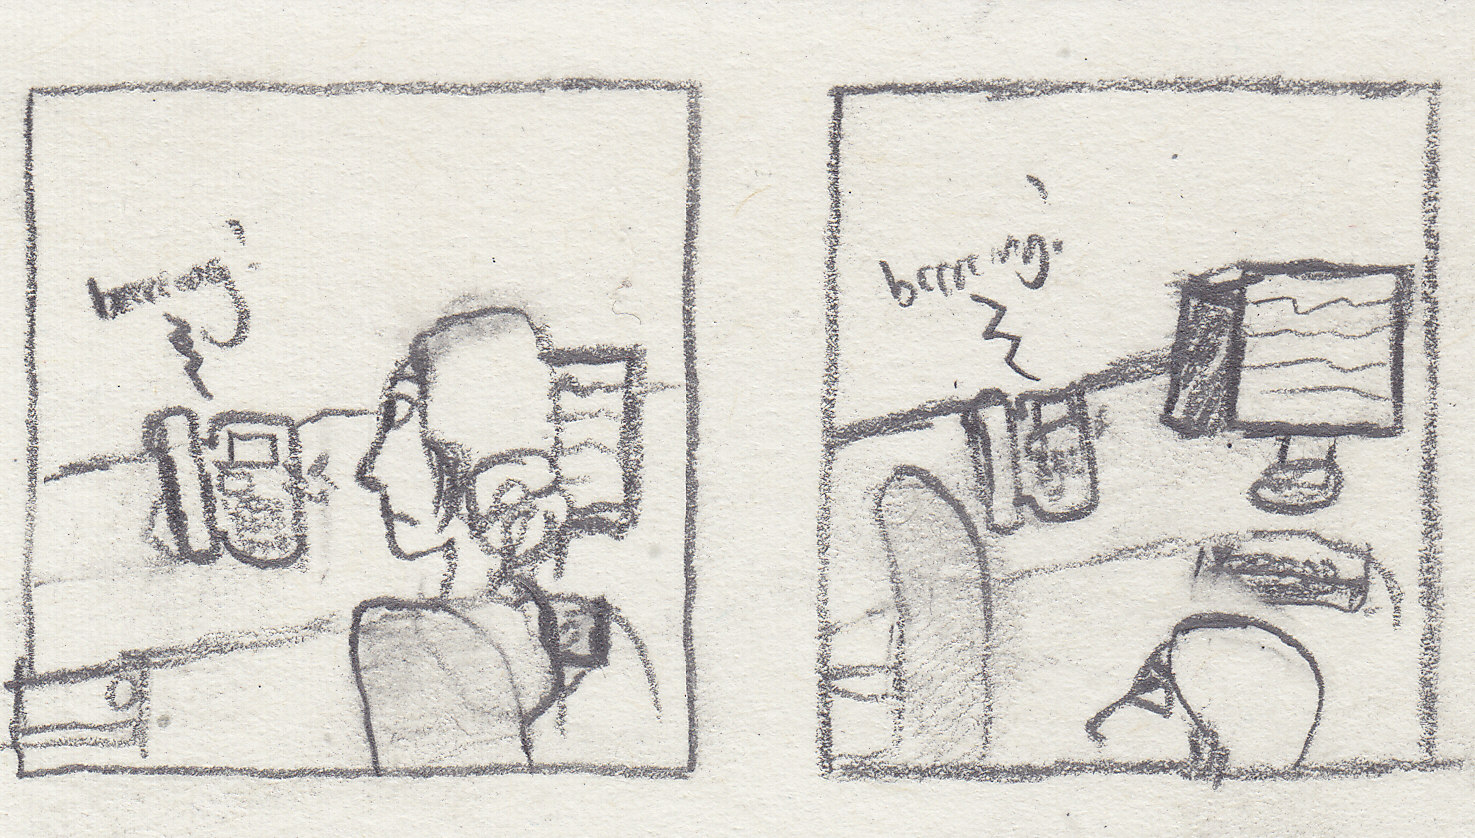 a comic on coarse paper drawn in pencil. Frame 1: me sitting at an office desk looking at a phone ringing. Frame 2: the top of my head as I'm hiding under the office desk while the phone is still ringing.